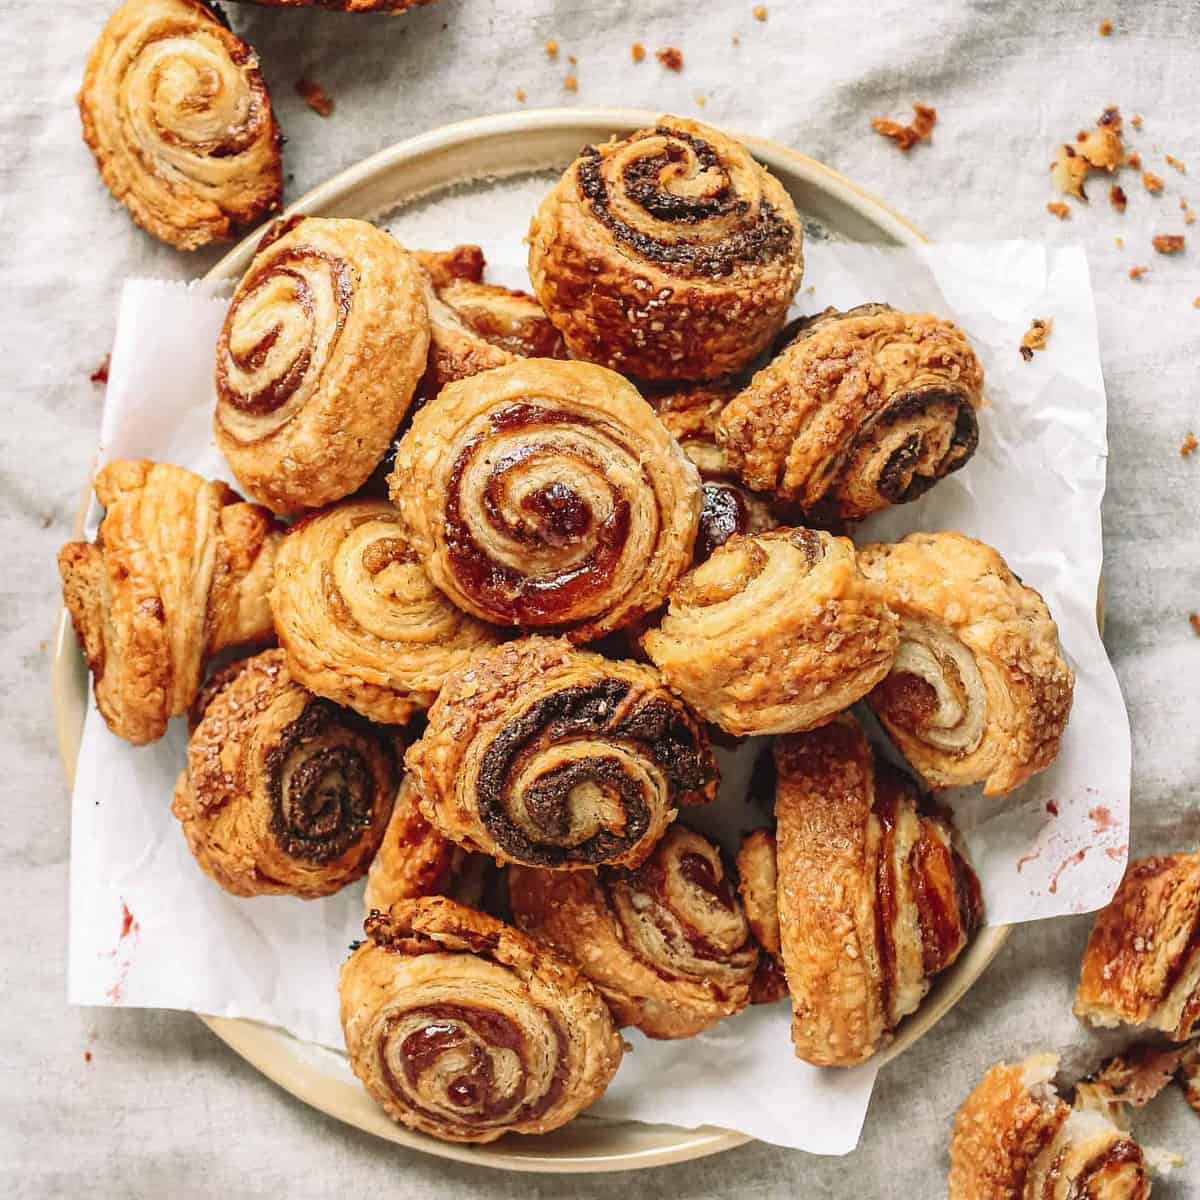  These vegan rugelach are so easy to make, you'll wonder why you never tried it before.